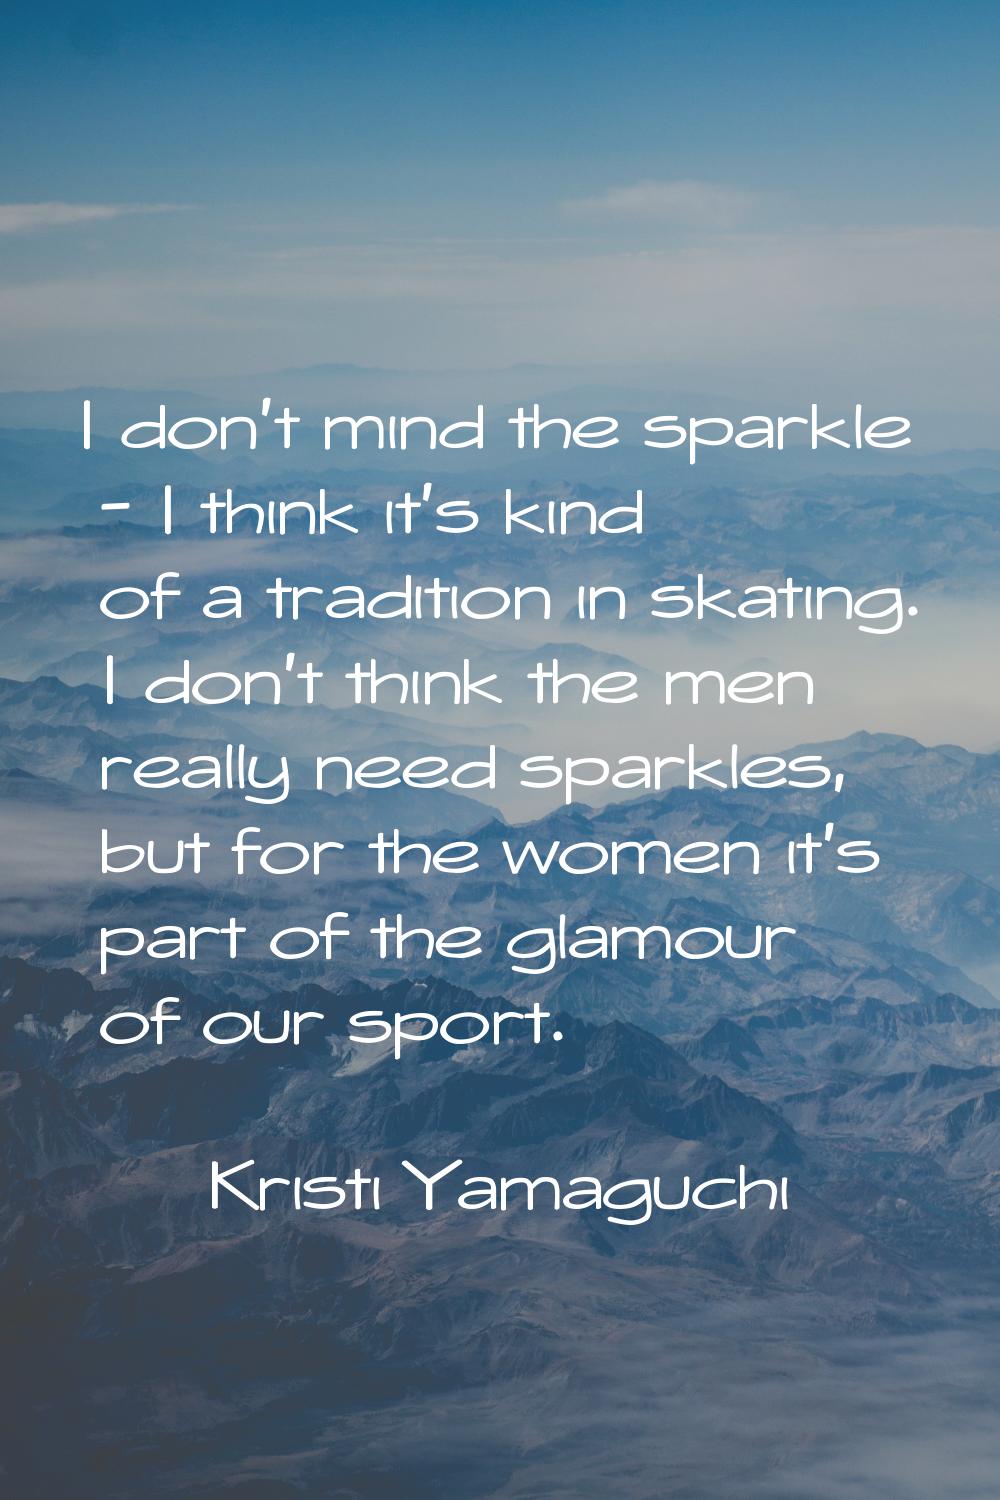 I don't mind the sparkle - I think it's kind of a tradition in skating. I don't think the men reall